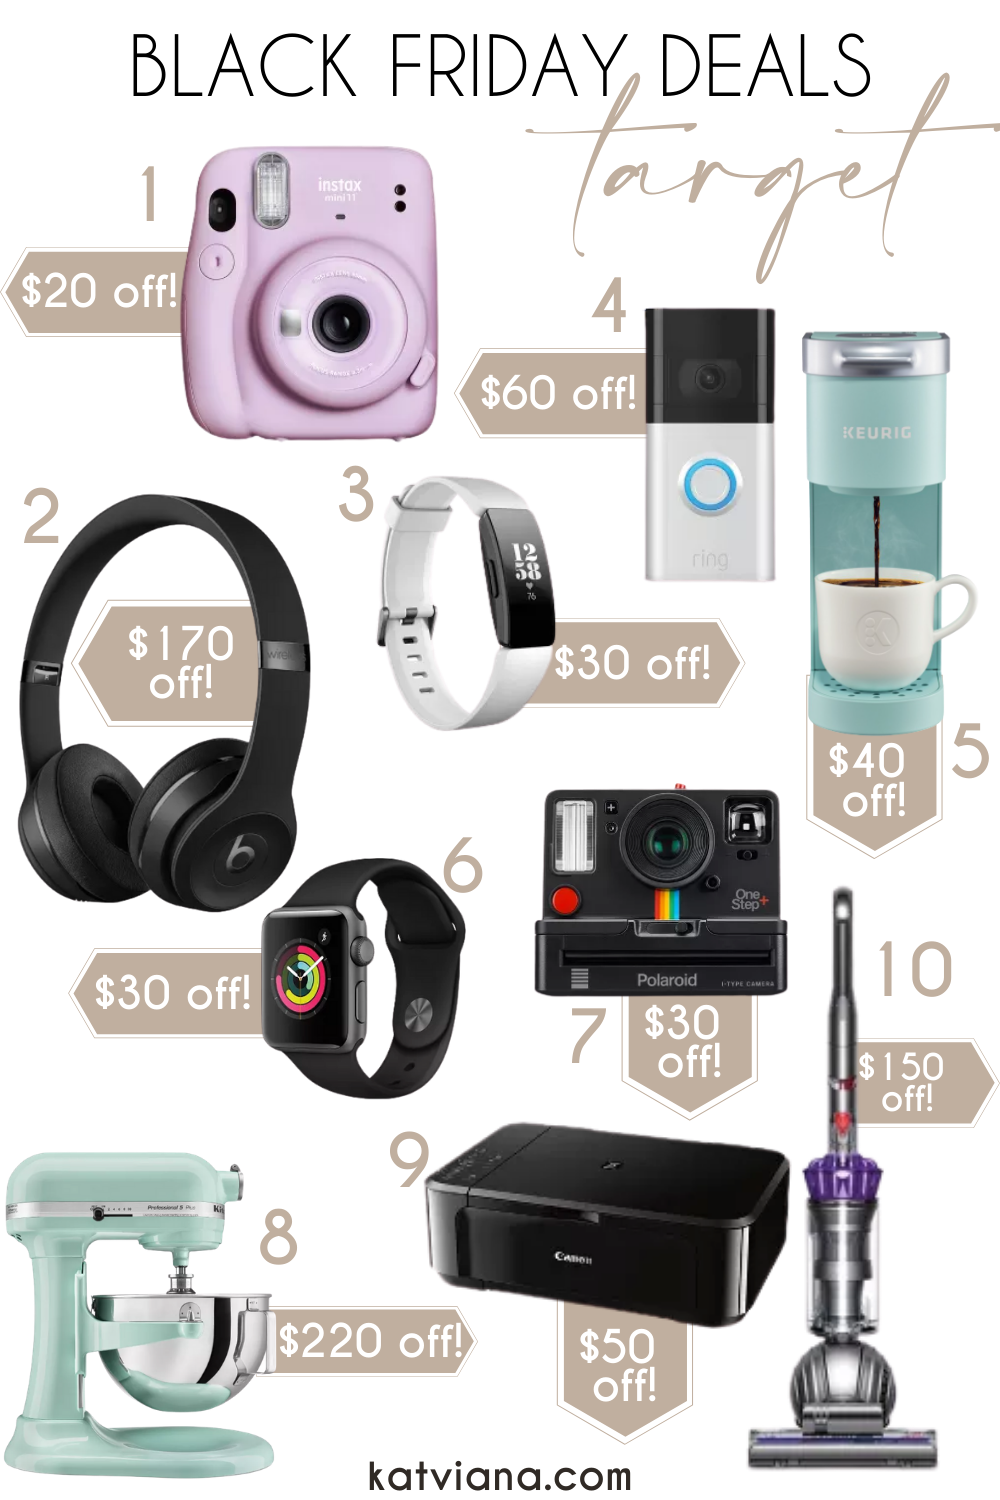 The best Black Friday deals from Target: $220 off KitchenAid stand mixer, $30 off polaroid cameras, $30 printers and $150 off dyson vacuums | Kat Viana